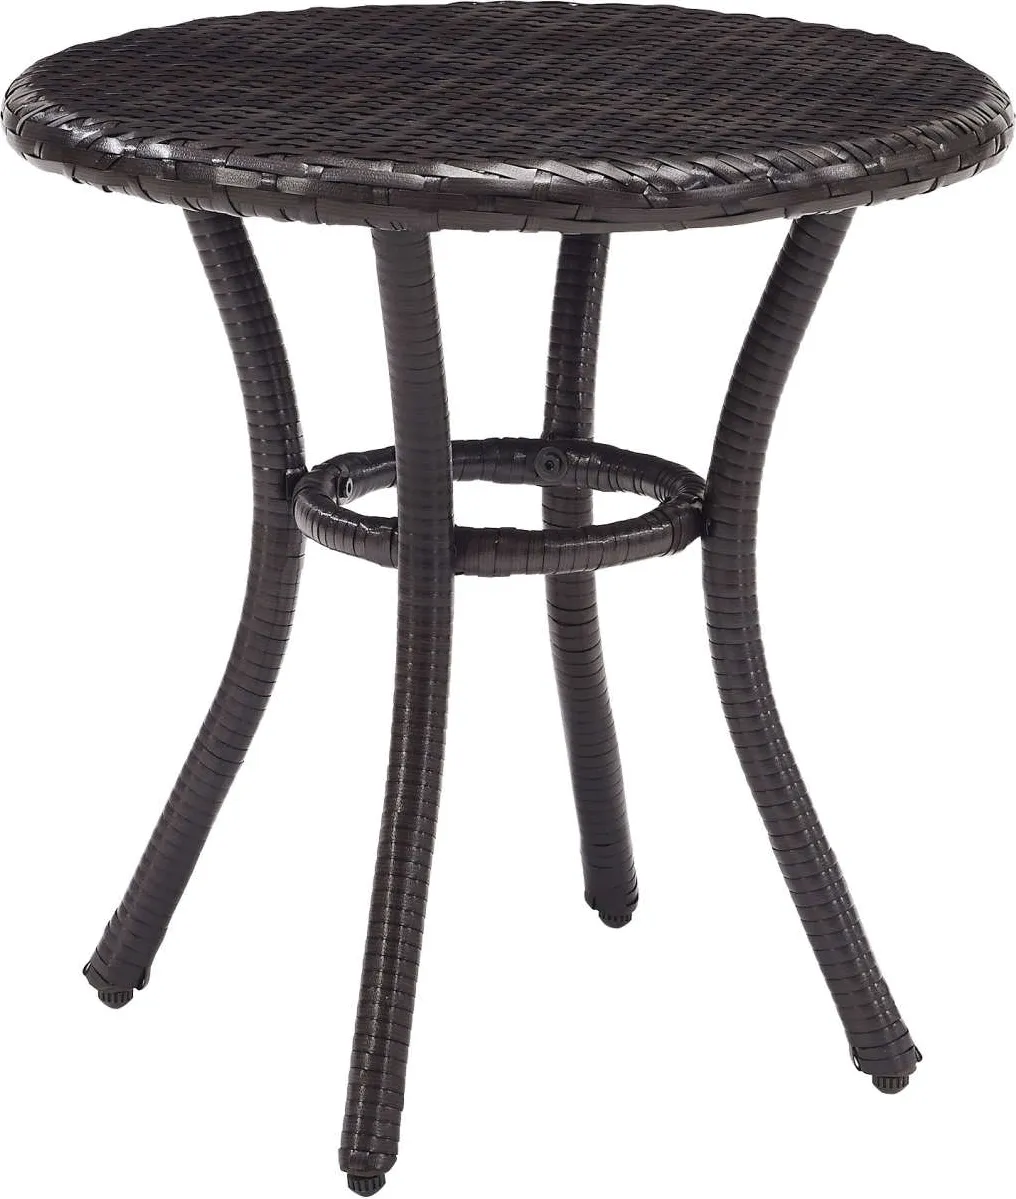 Crosley Furniture® Palm Harbor Brown Outdoor Wicker Round Side Table